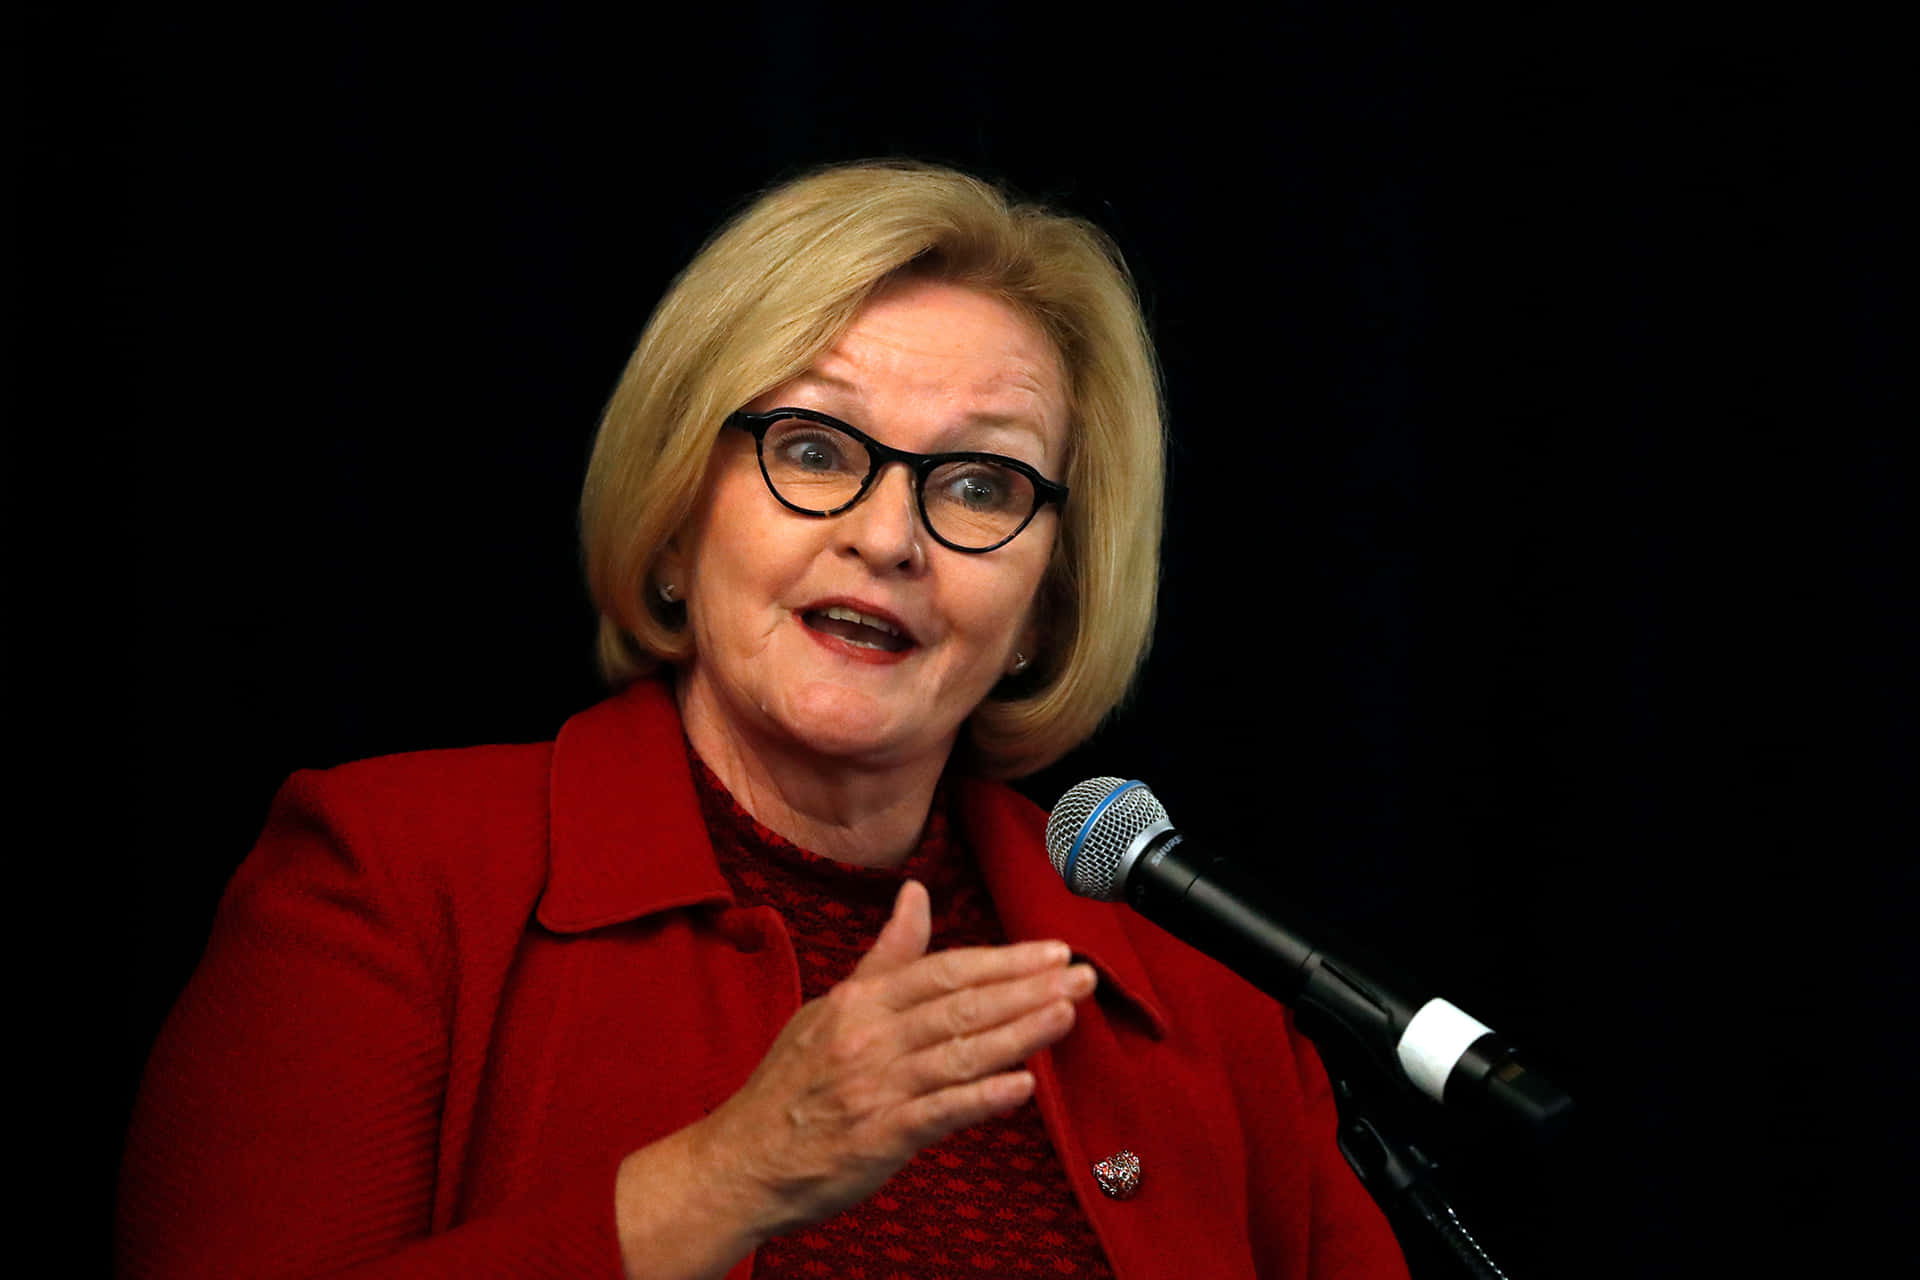 Claire Mccaskill Gesturing With Microphone Wallpaper